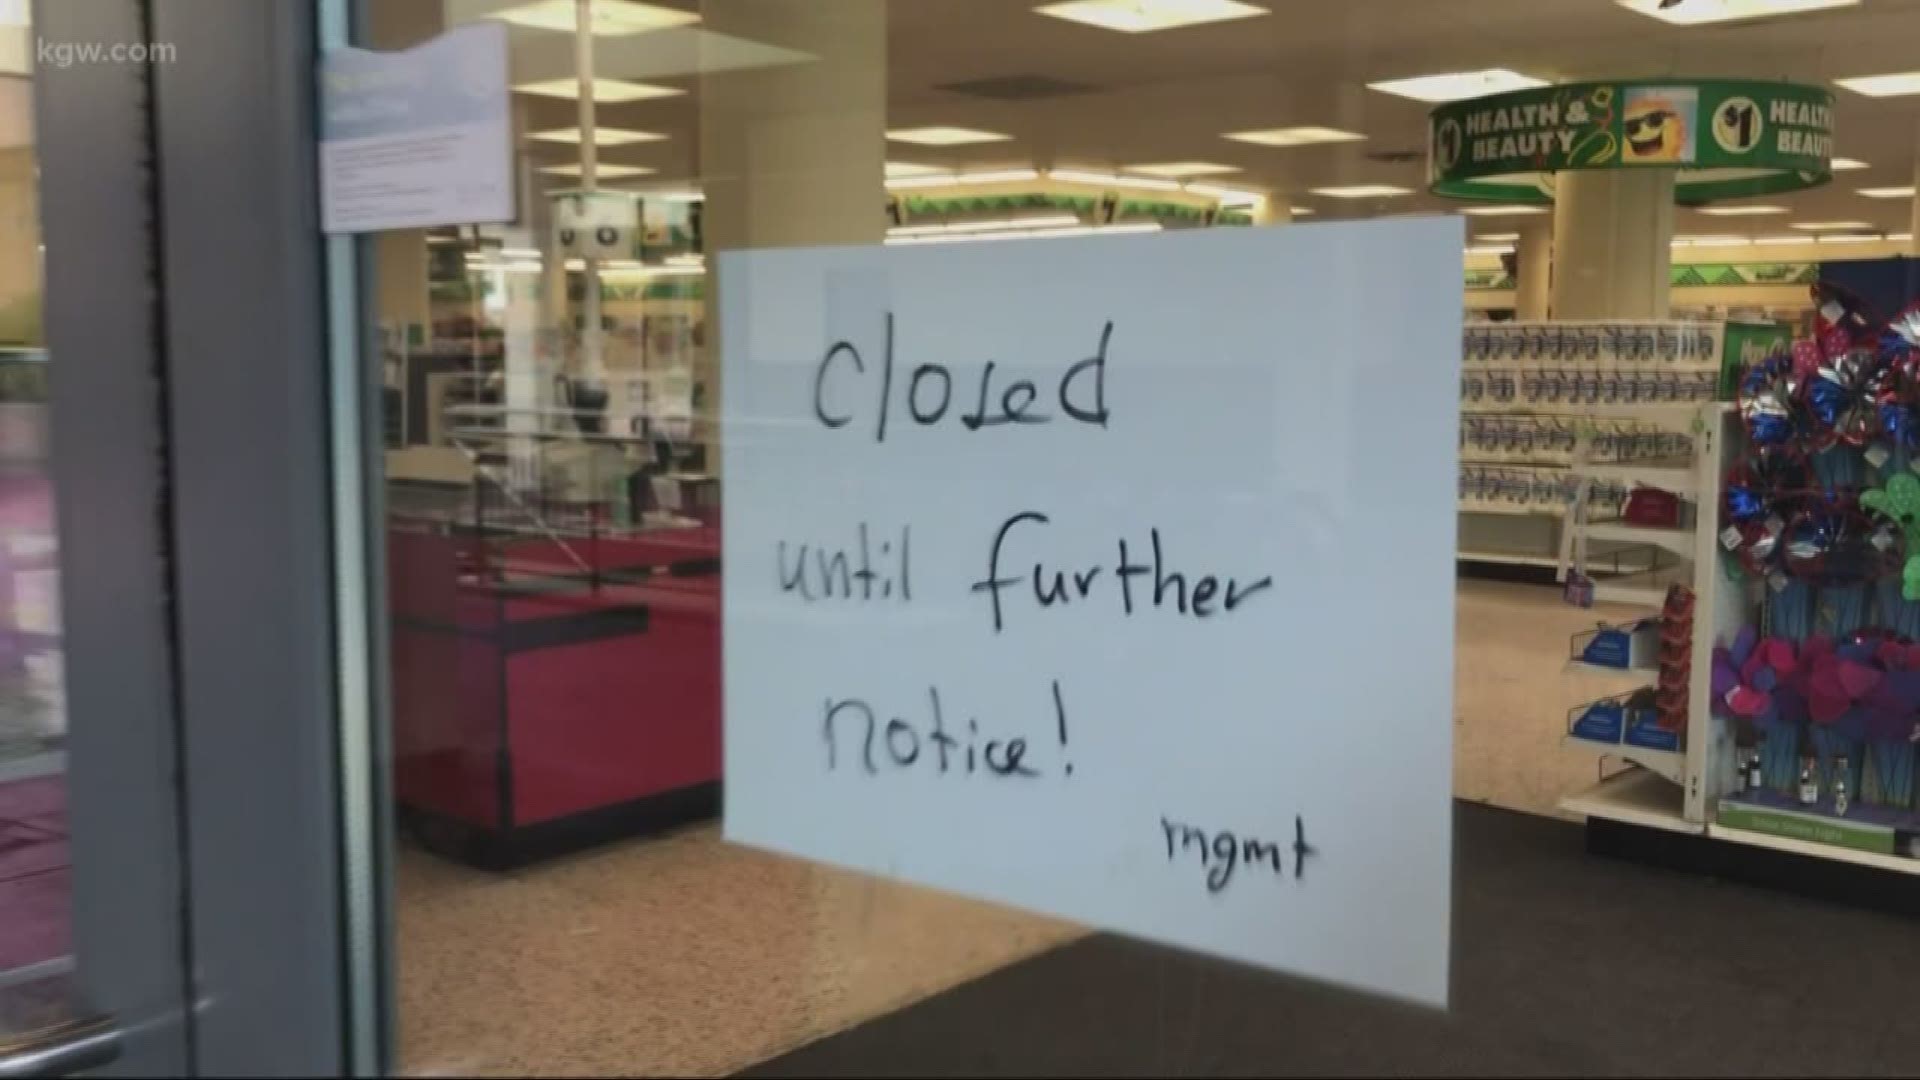 The Oregon Occupational Safety & Health (OSHA) is investigating a Northeast Portland Dollar Tree store following a rodent infestation and employee complaints.